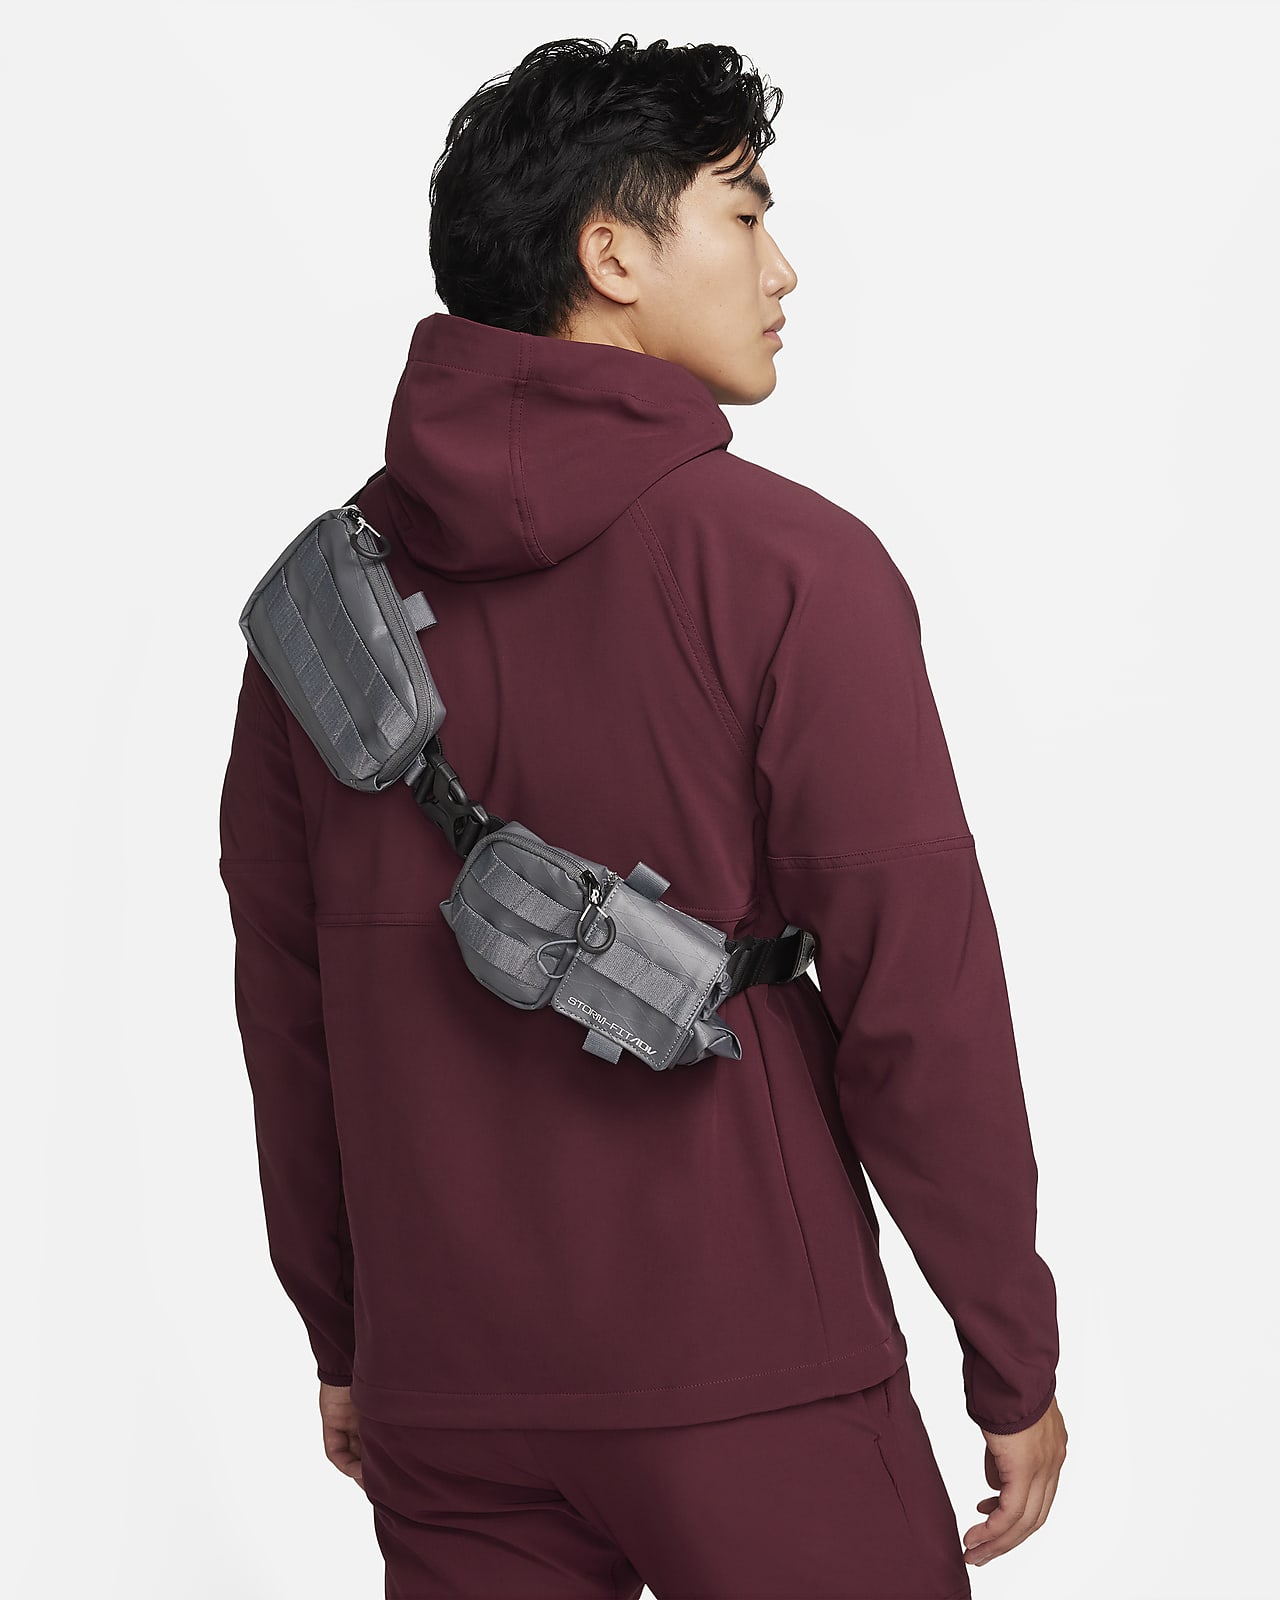 Nike Storm-FIT ADV Utility Power Hip Pack (5L)